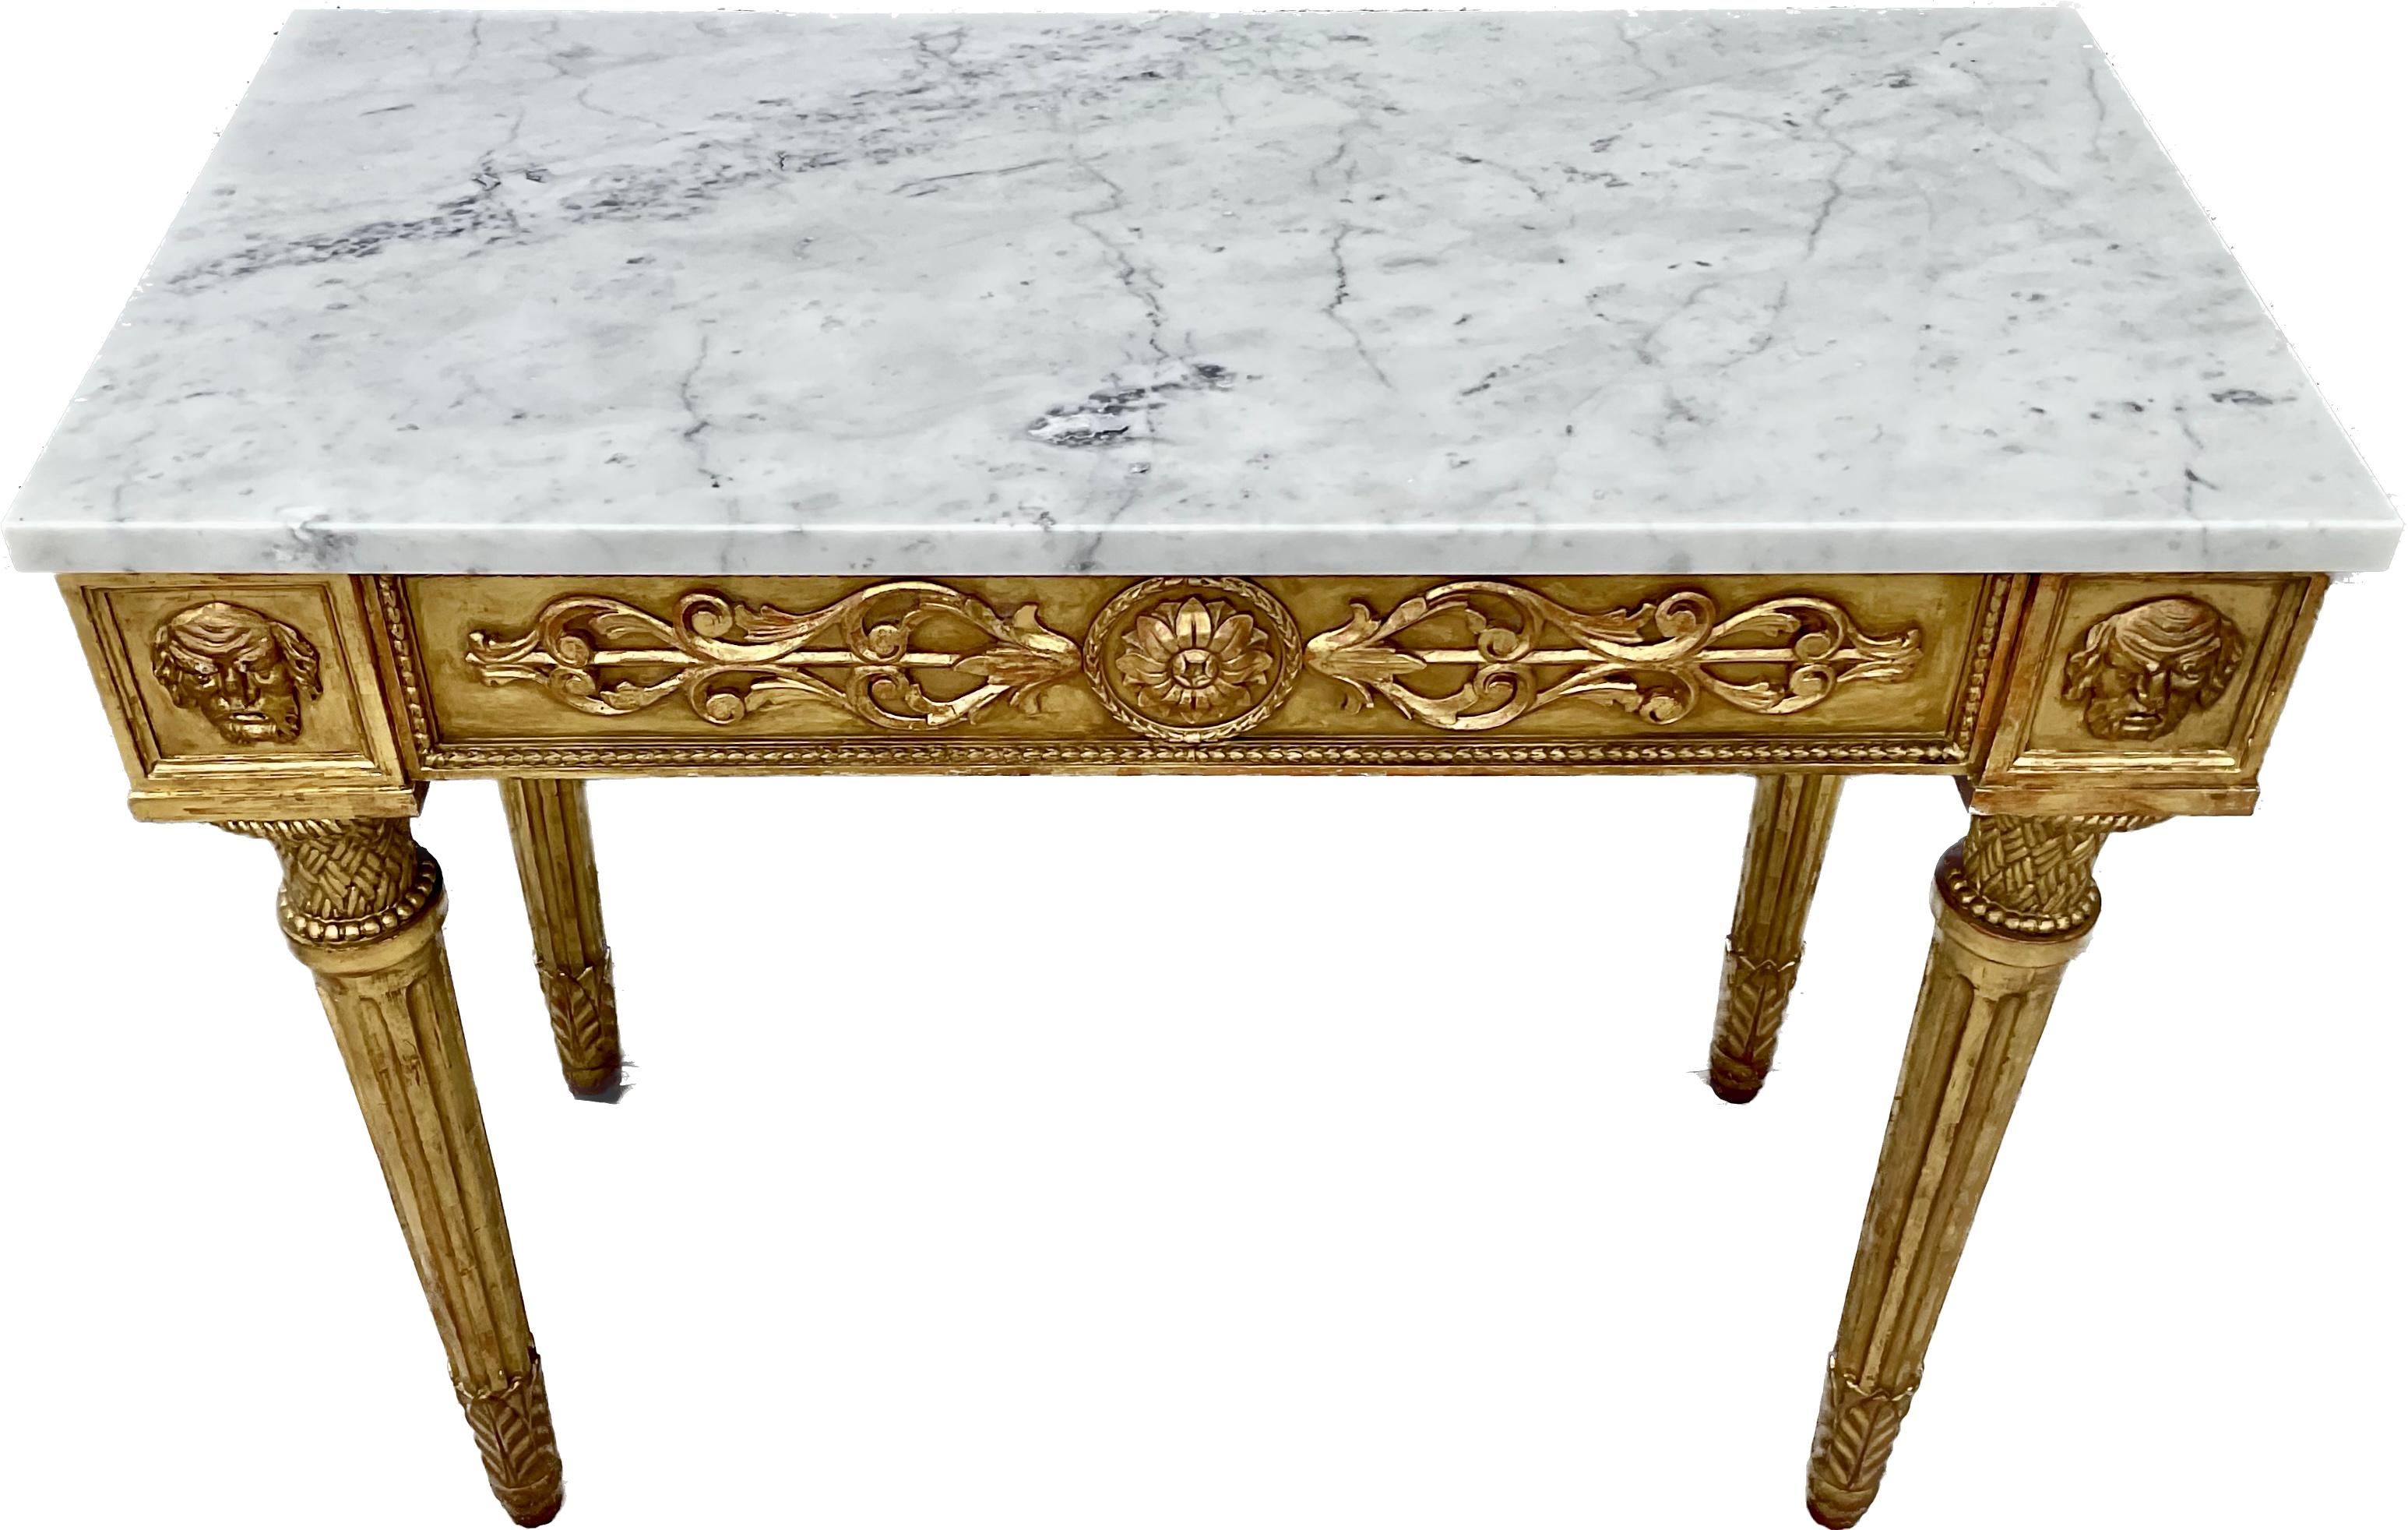 Pair Of 19th Century Italian Neoclassical Giltwood Console table With Marble Top For Sale 4